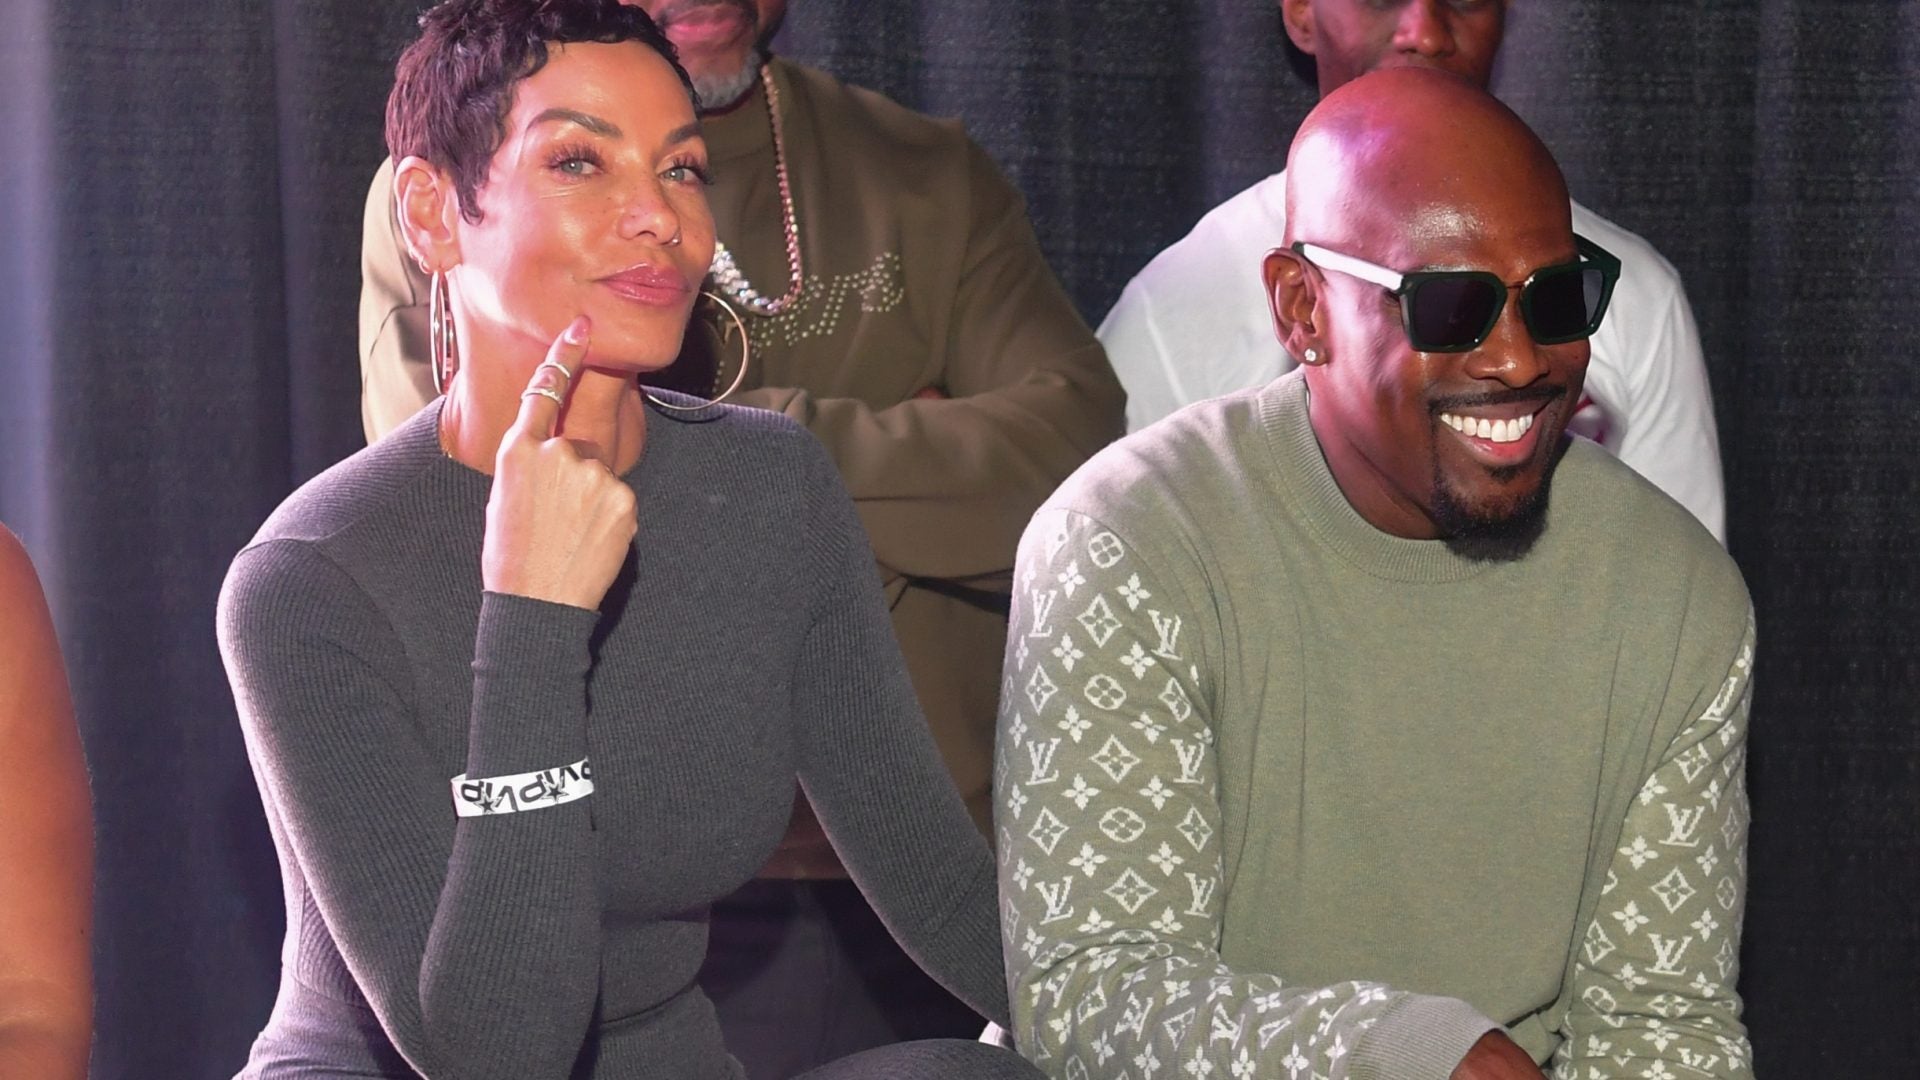 Nicole Murphy Breaks Her Silence After The Death Of Her Partner: 'You Were My World'